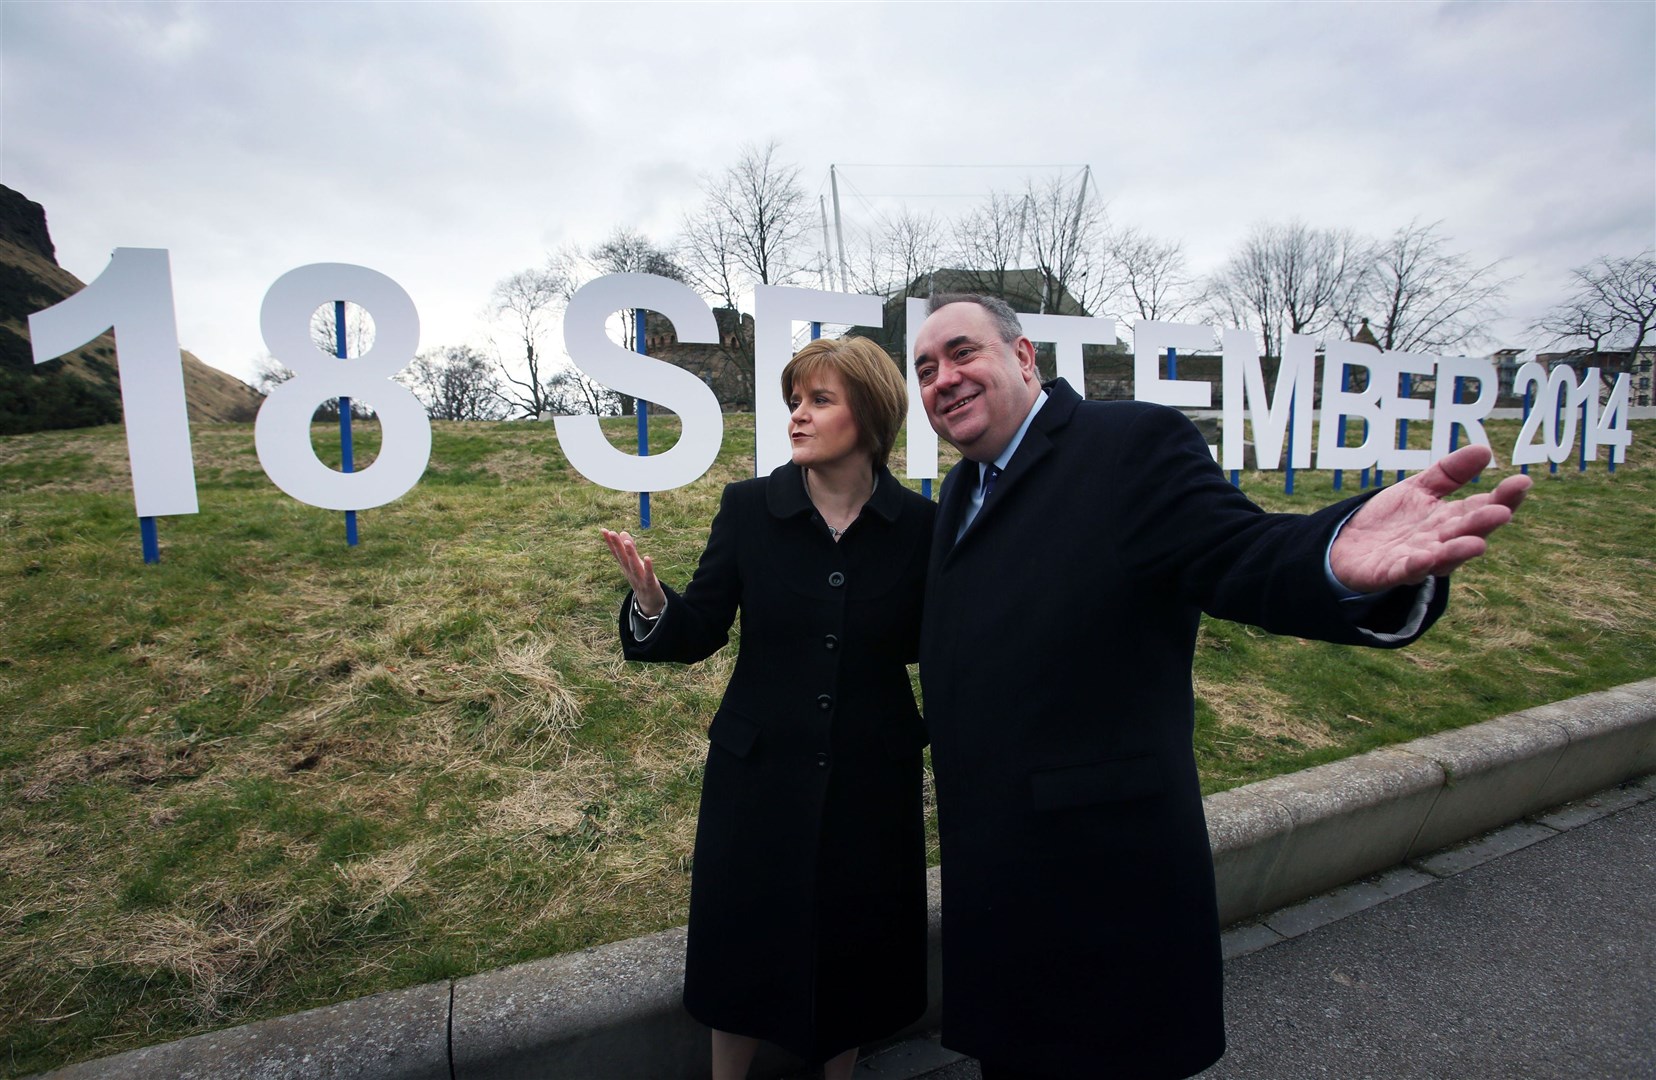 Then-first minister Alex Salmond and Deputy First Minister Nicola Sturgeon walk past a sign showing the date for the Scottish independence referendum in 2014 (David Cheskin/PA)